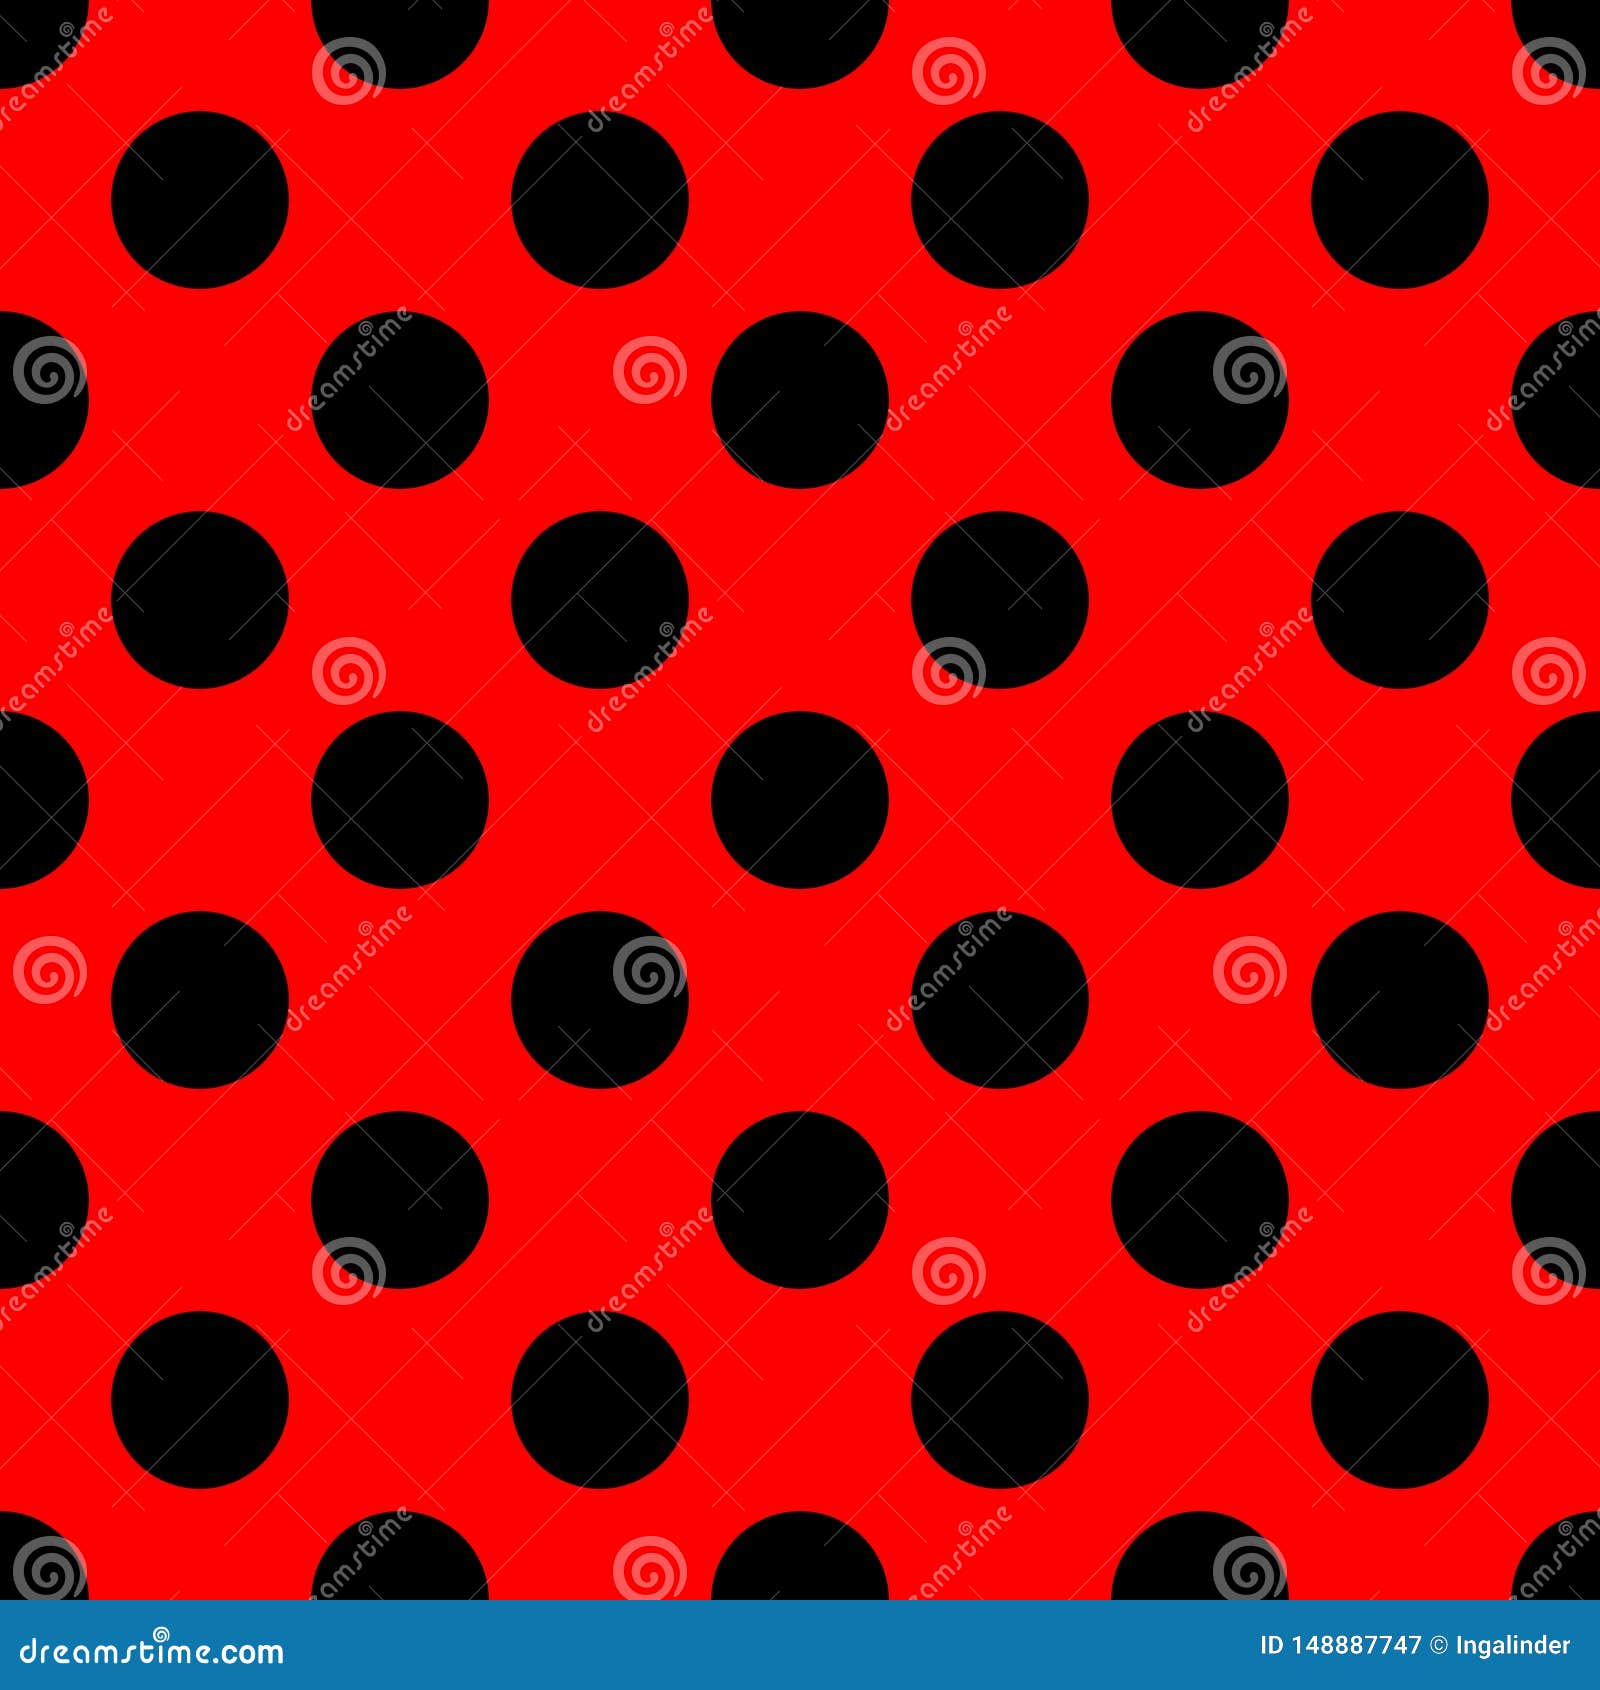 Tile Vector Pattern With Black Polka Dots On Red Background